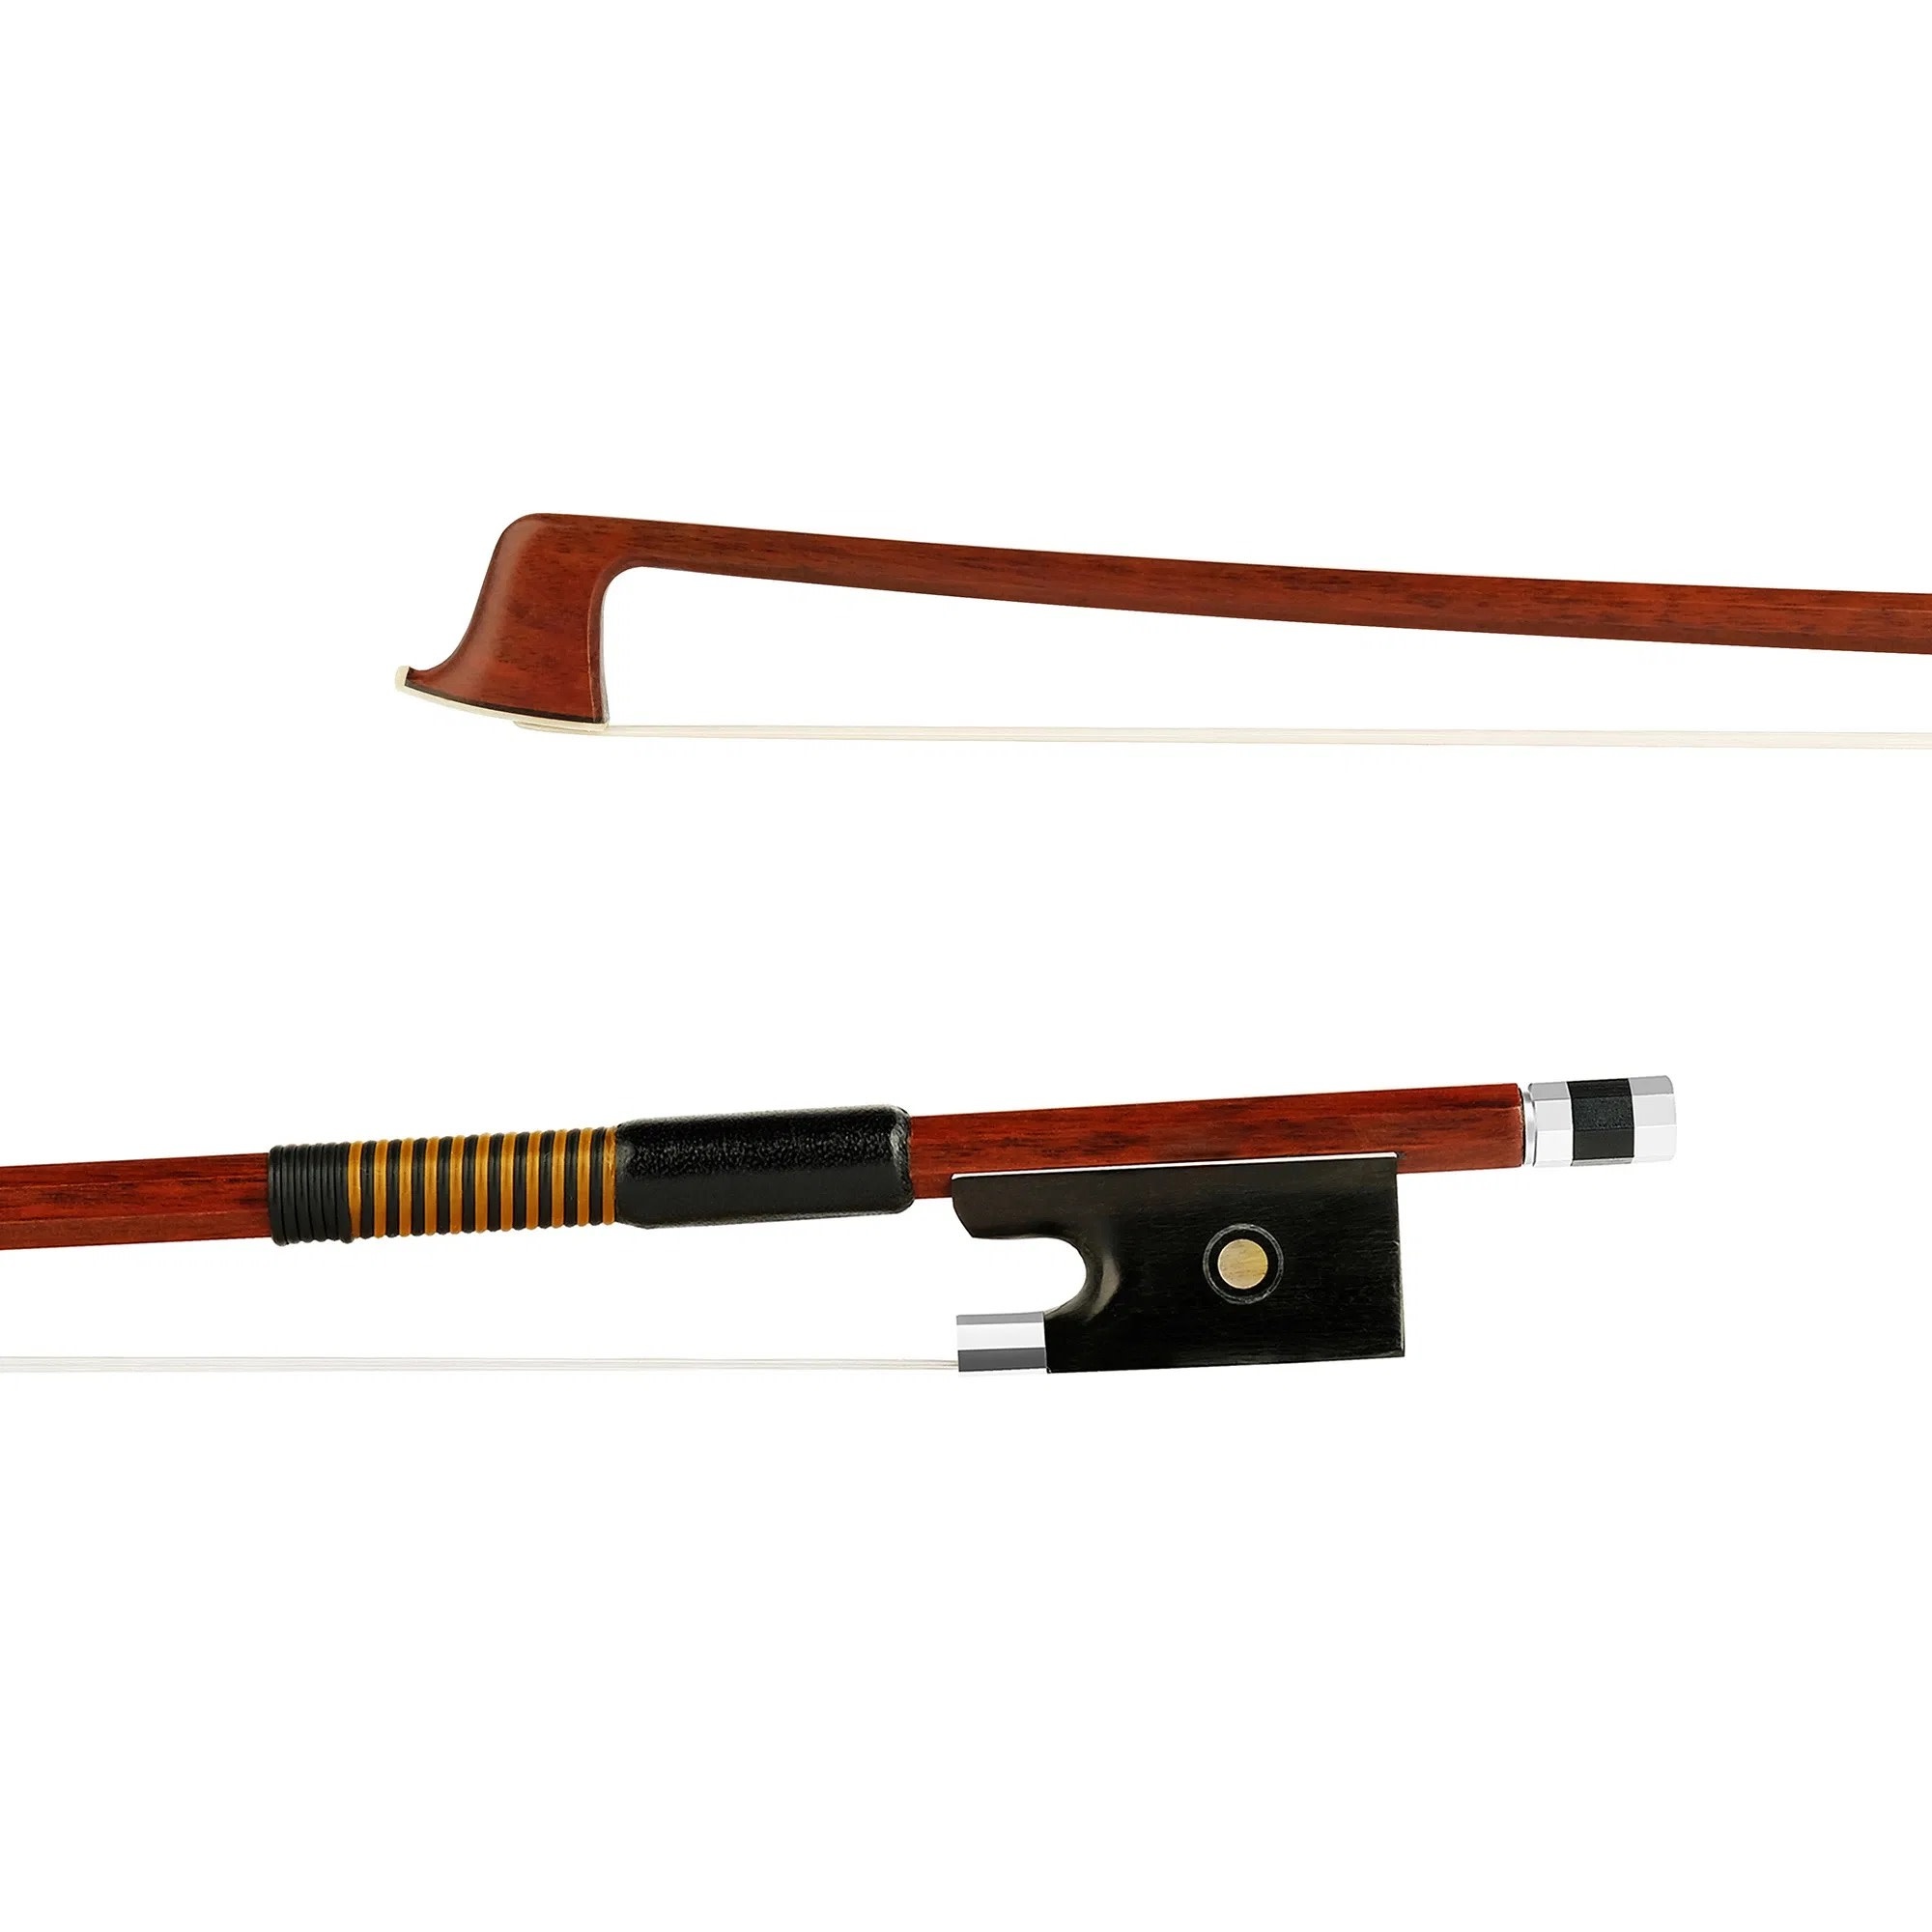 Student 1/16 violin bow, better